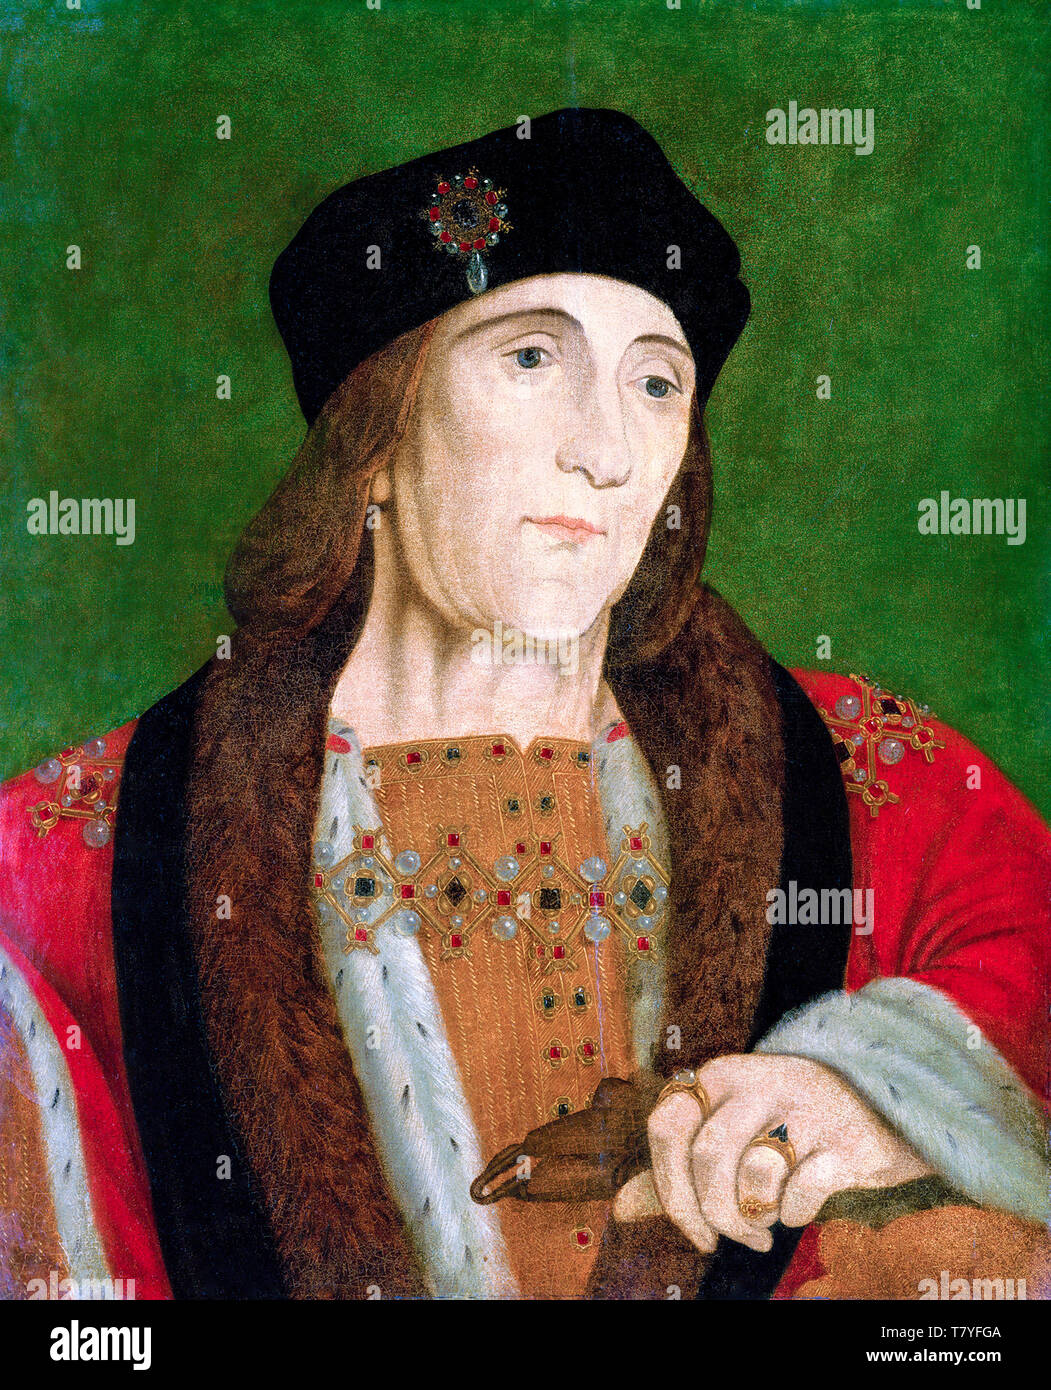 Henry VII of England (1457-1509), King of England (1485-1509), portrait painting, 16th Century Stock Photo